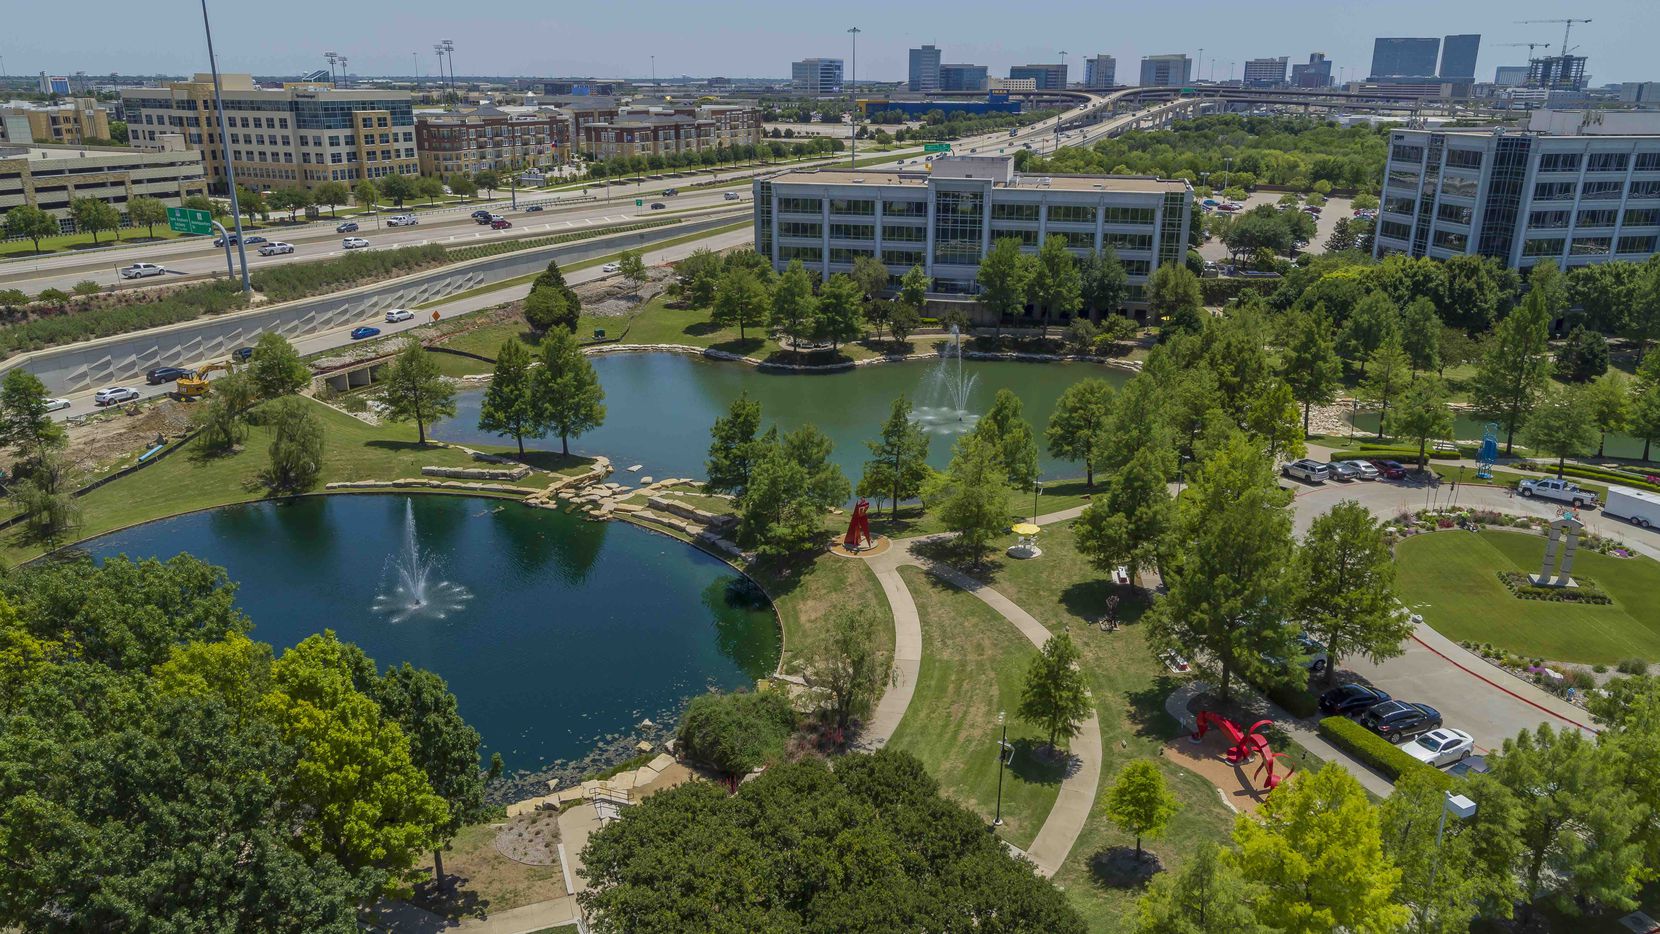 Hall Park started out more than 20 years ago and is the largest office campus in Frisco.